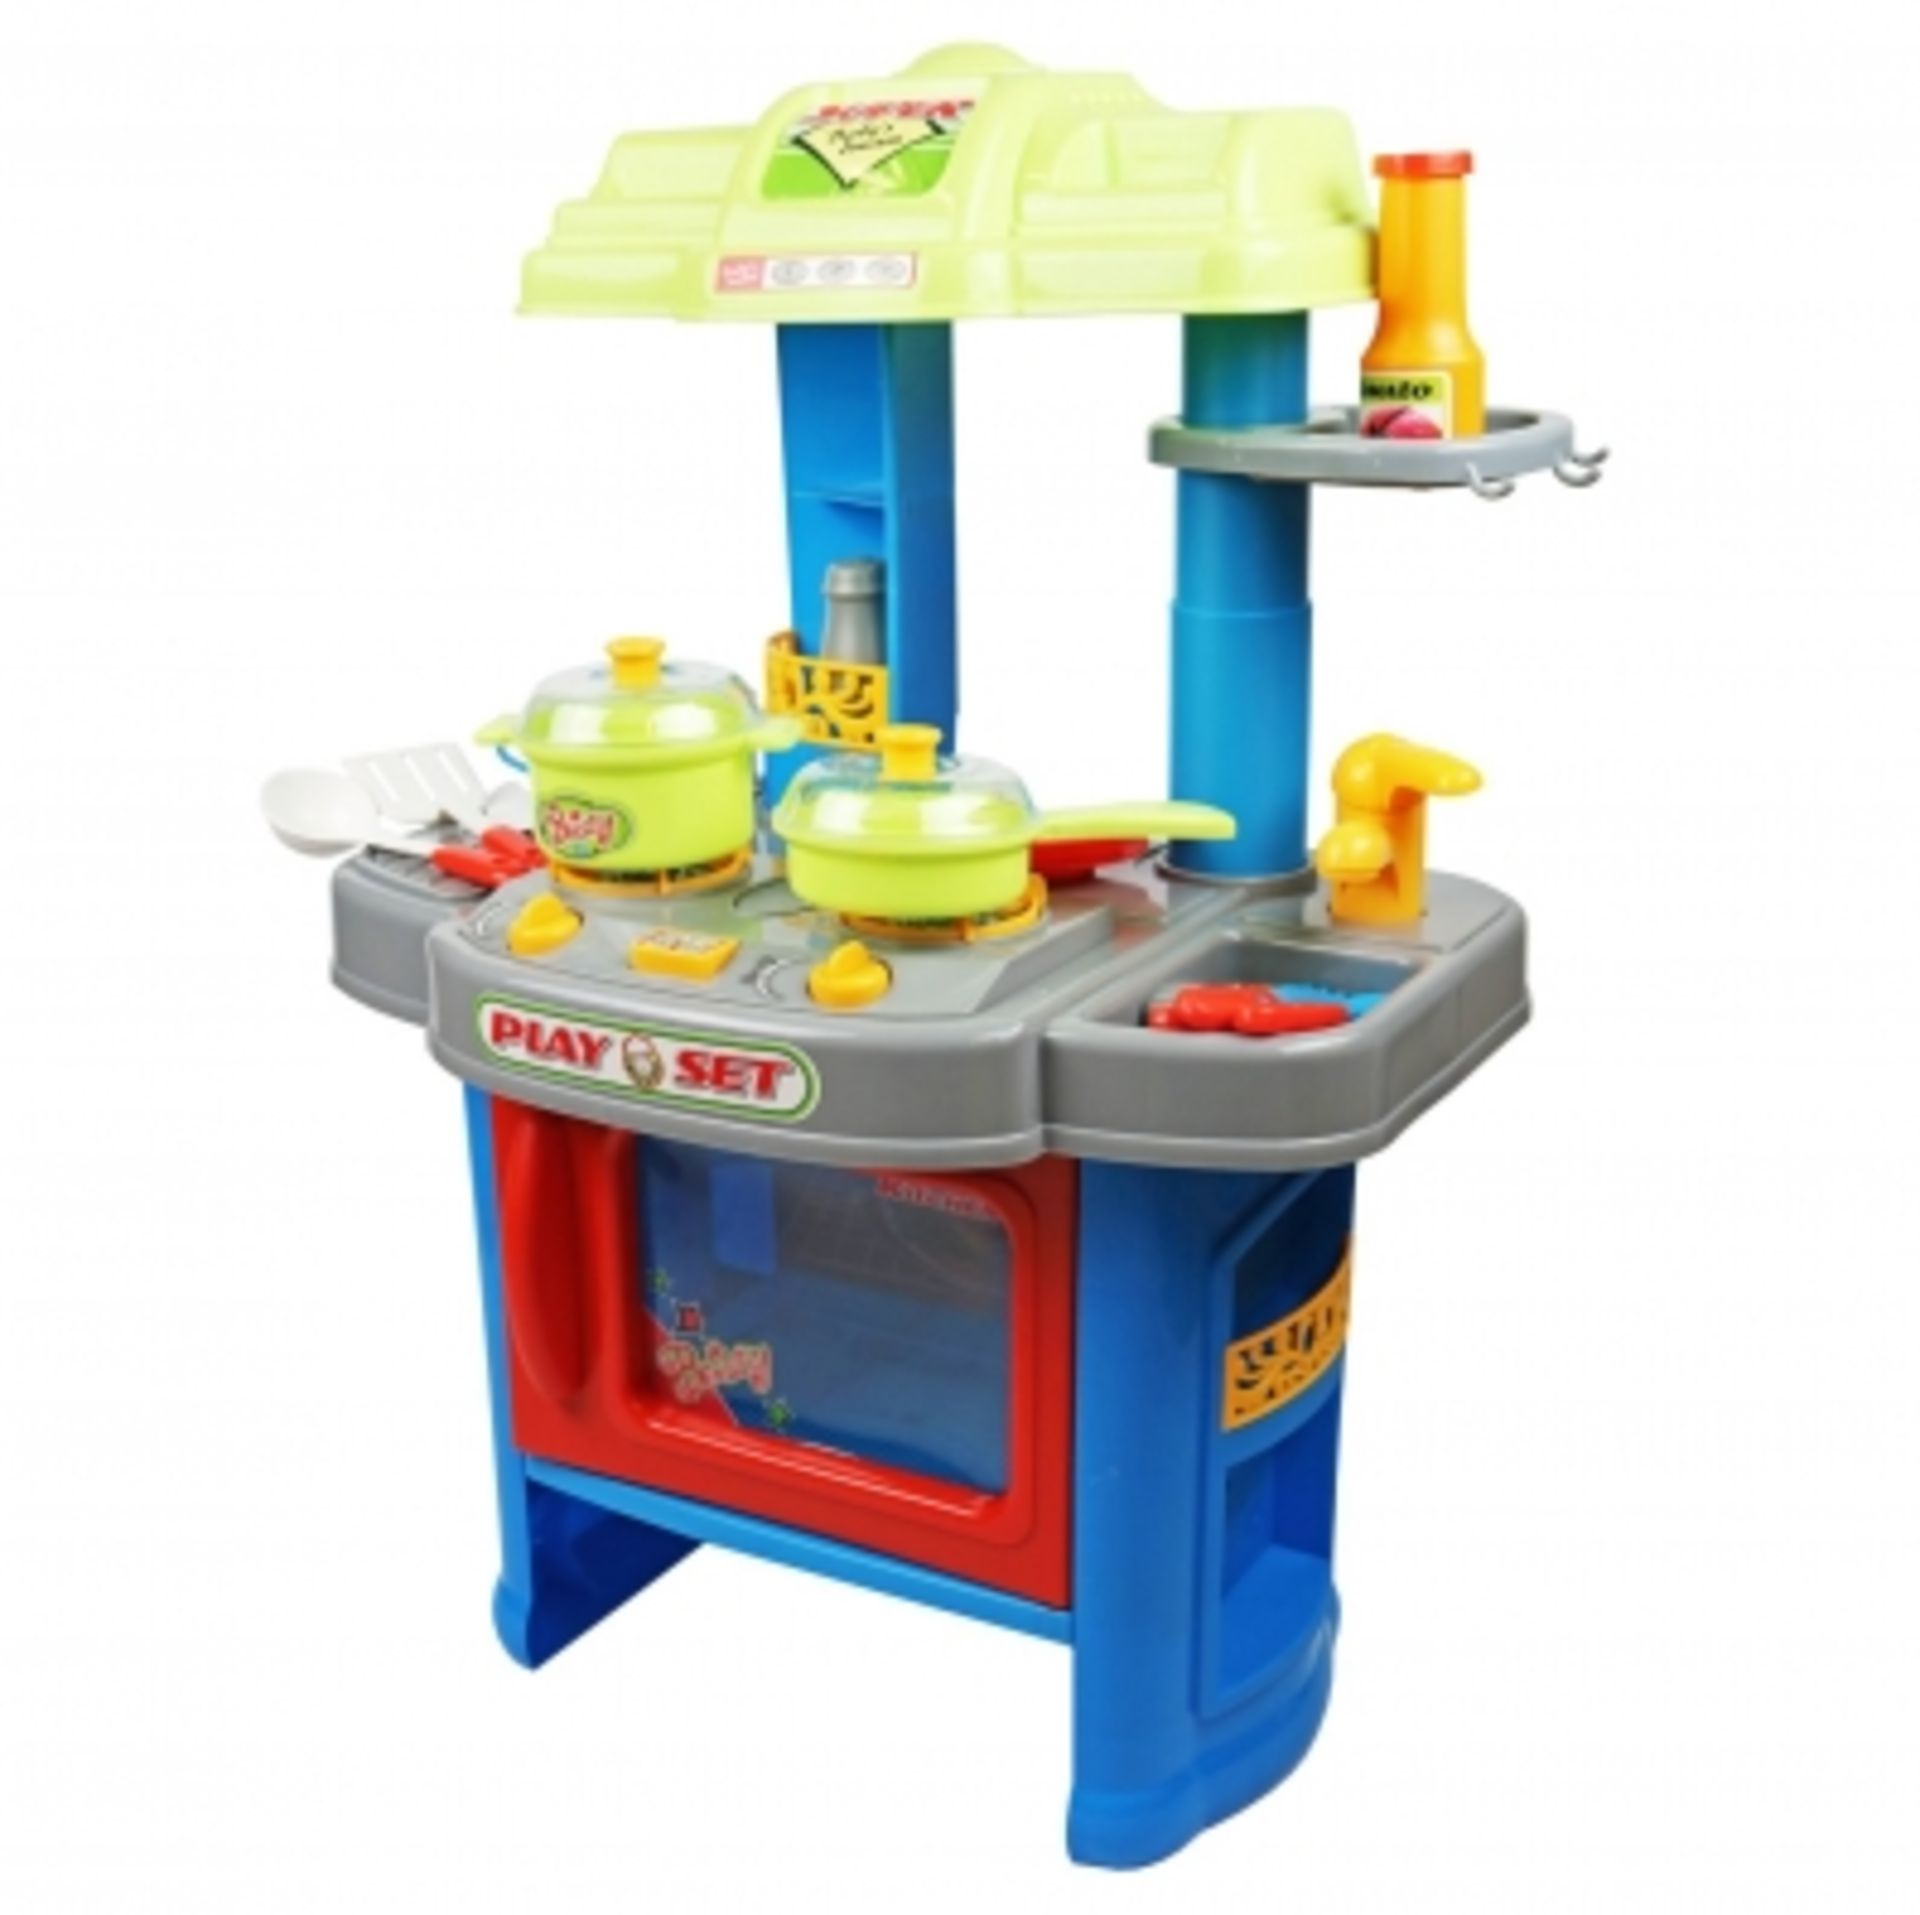 (RL42) Childrens Kids Roleplay Cooker Kitchen Cooking Toy Playset This Kitchen Play Set...